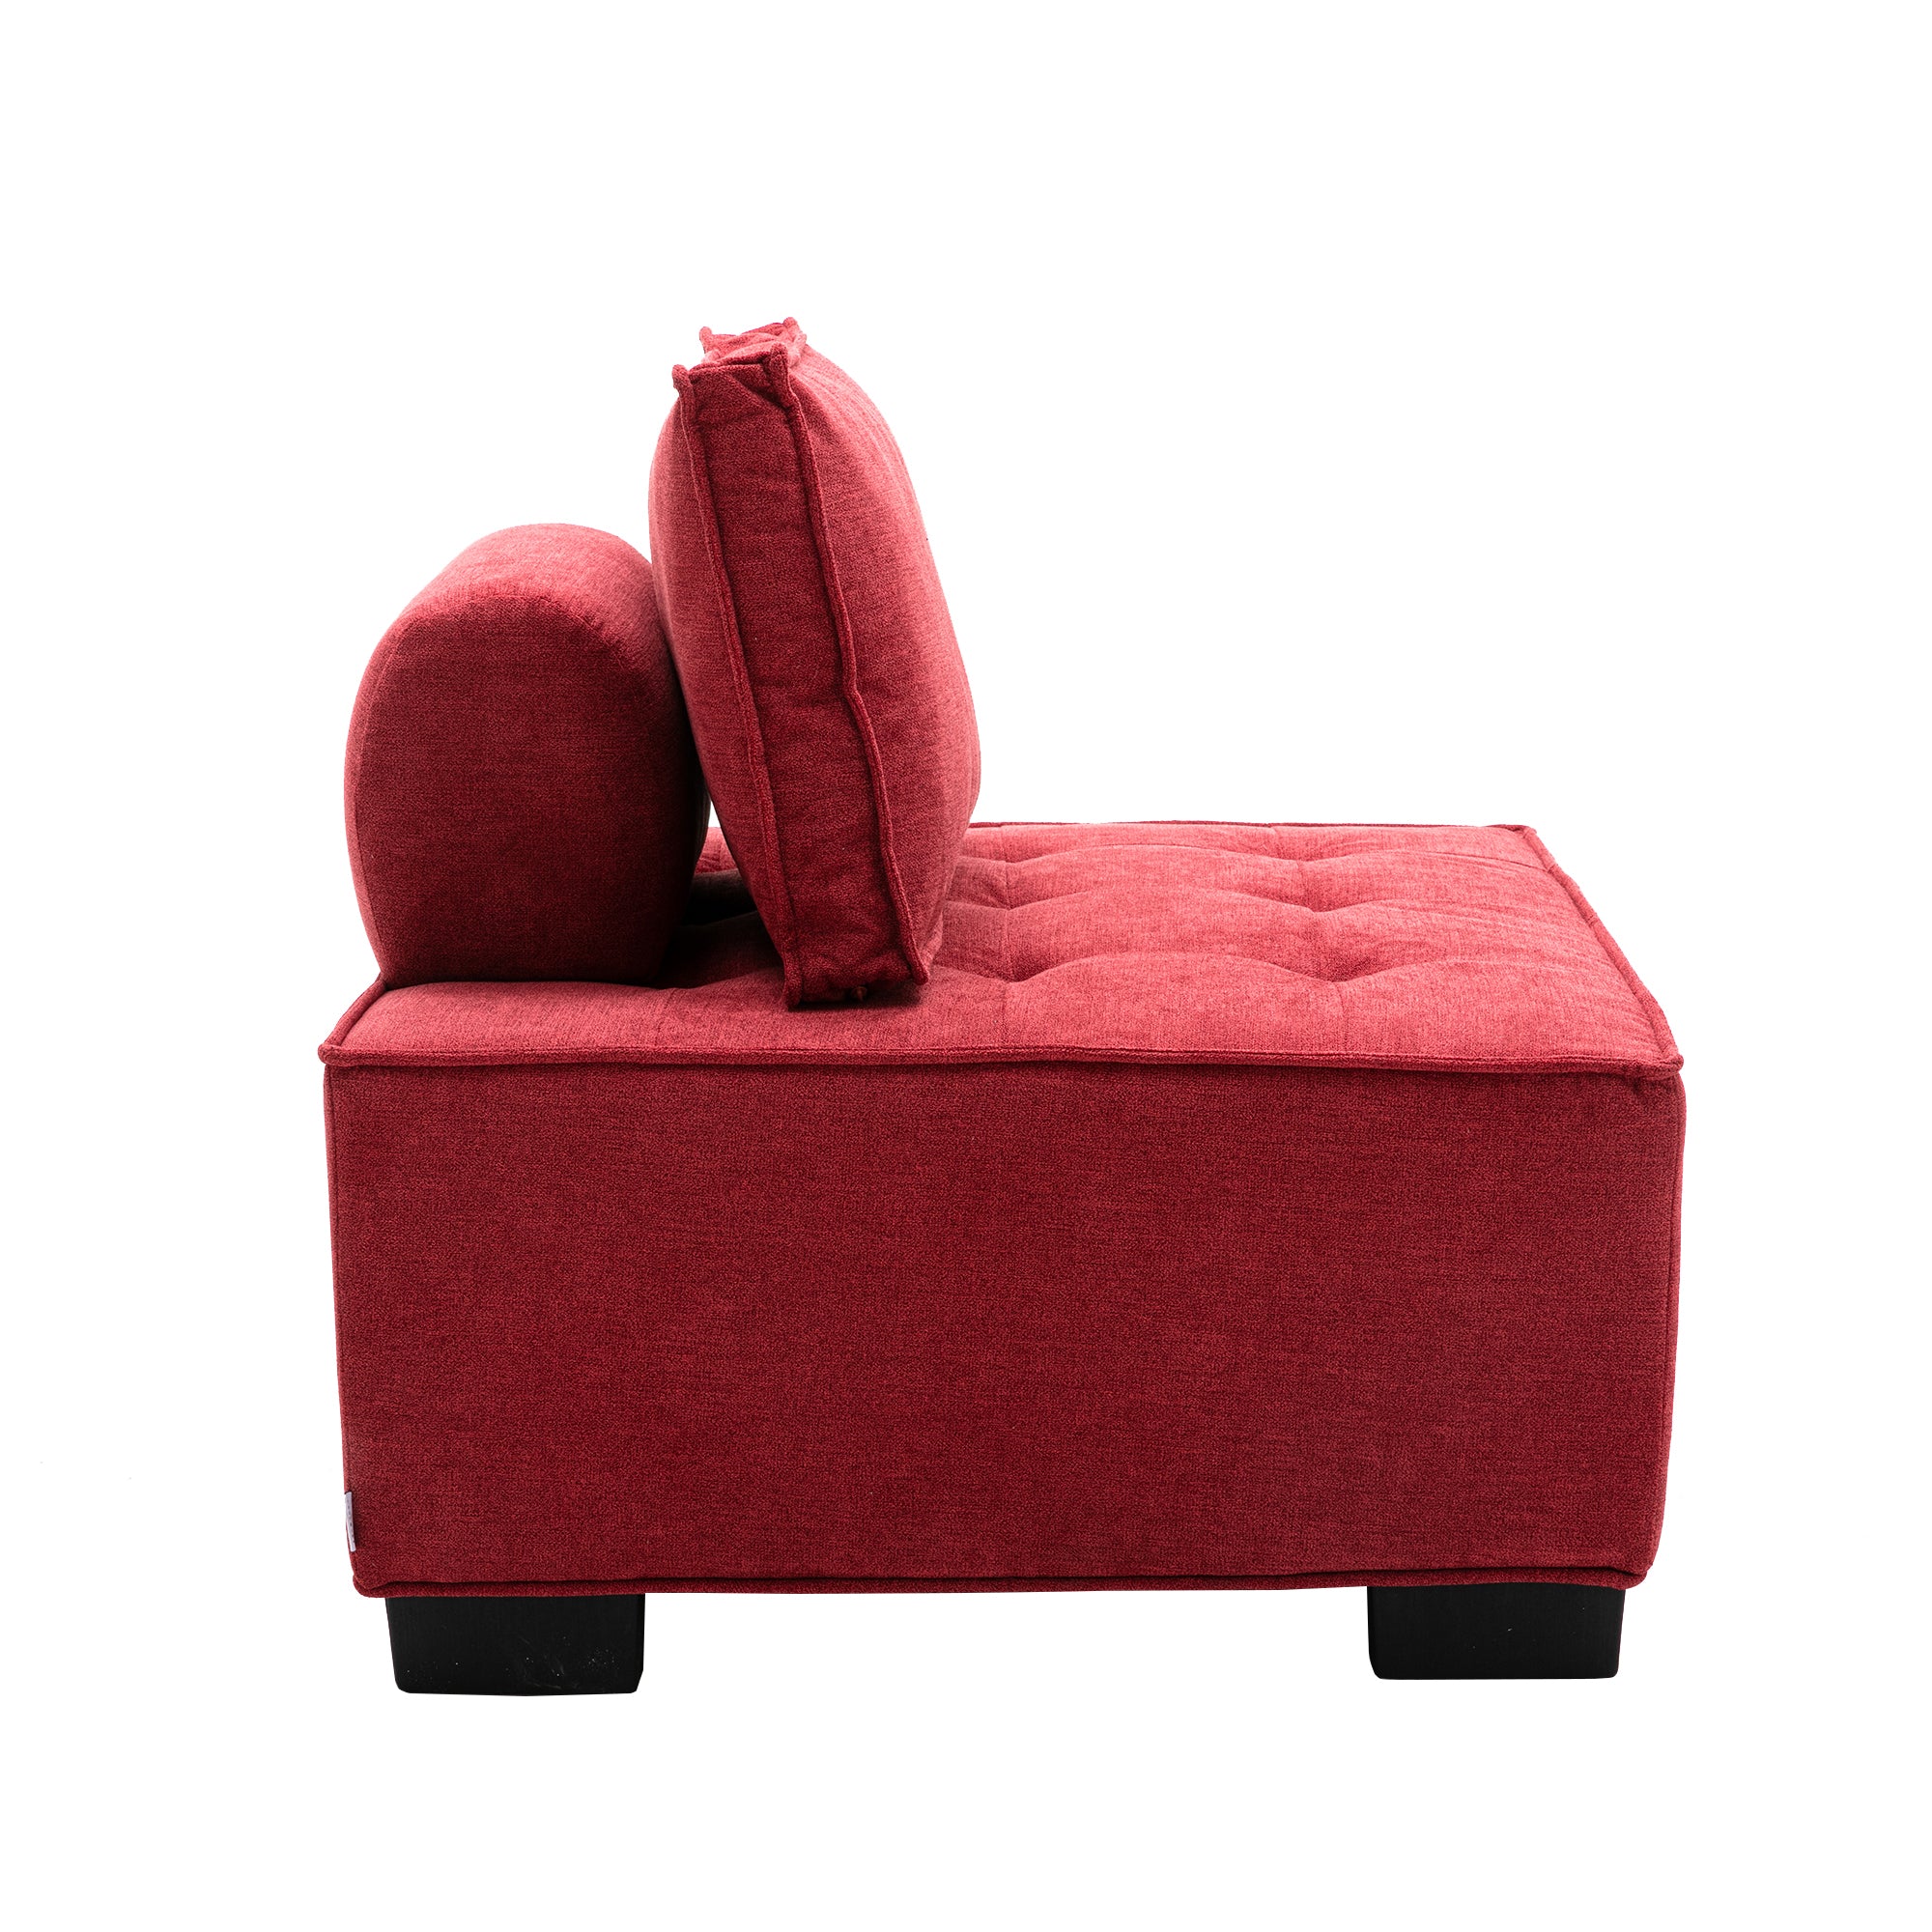 COOMORE LIVING ROOM OTTOMAN LAZY CHAIR rose red-polyester